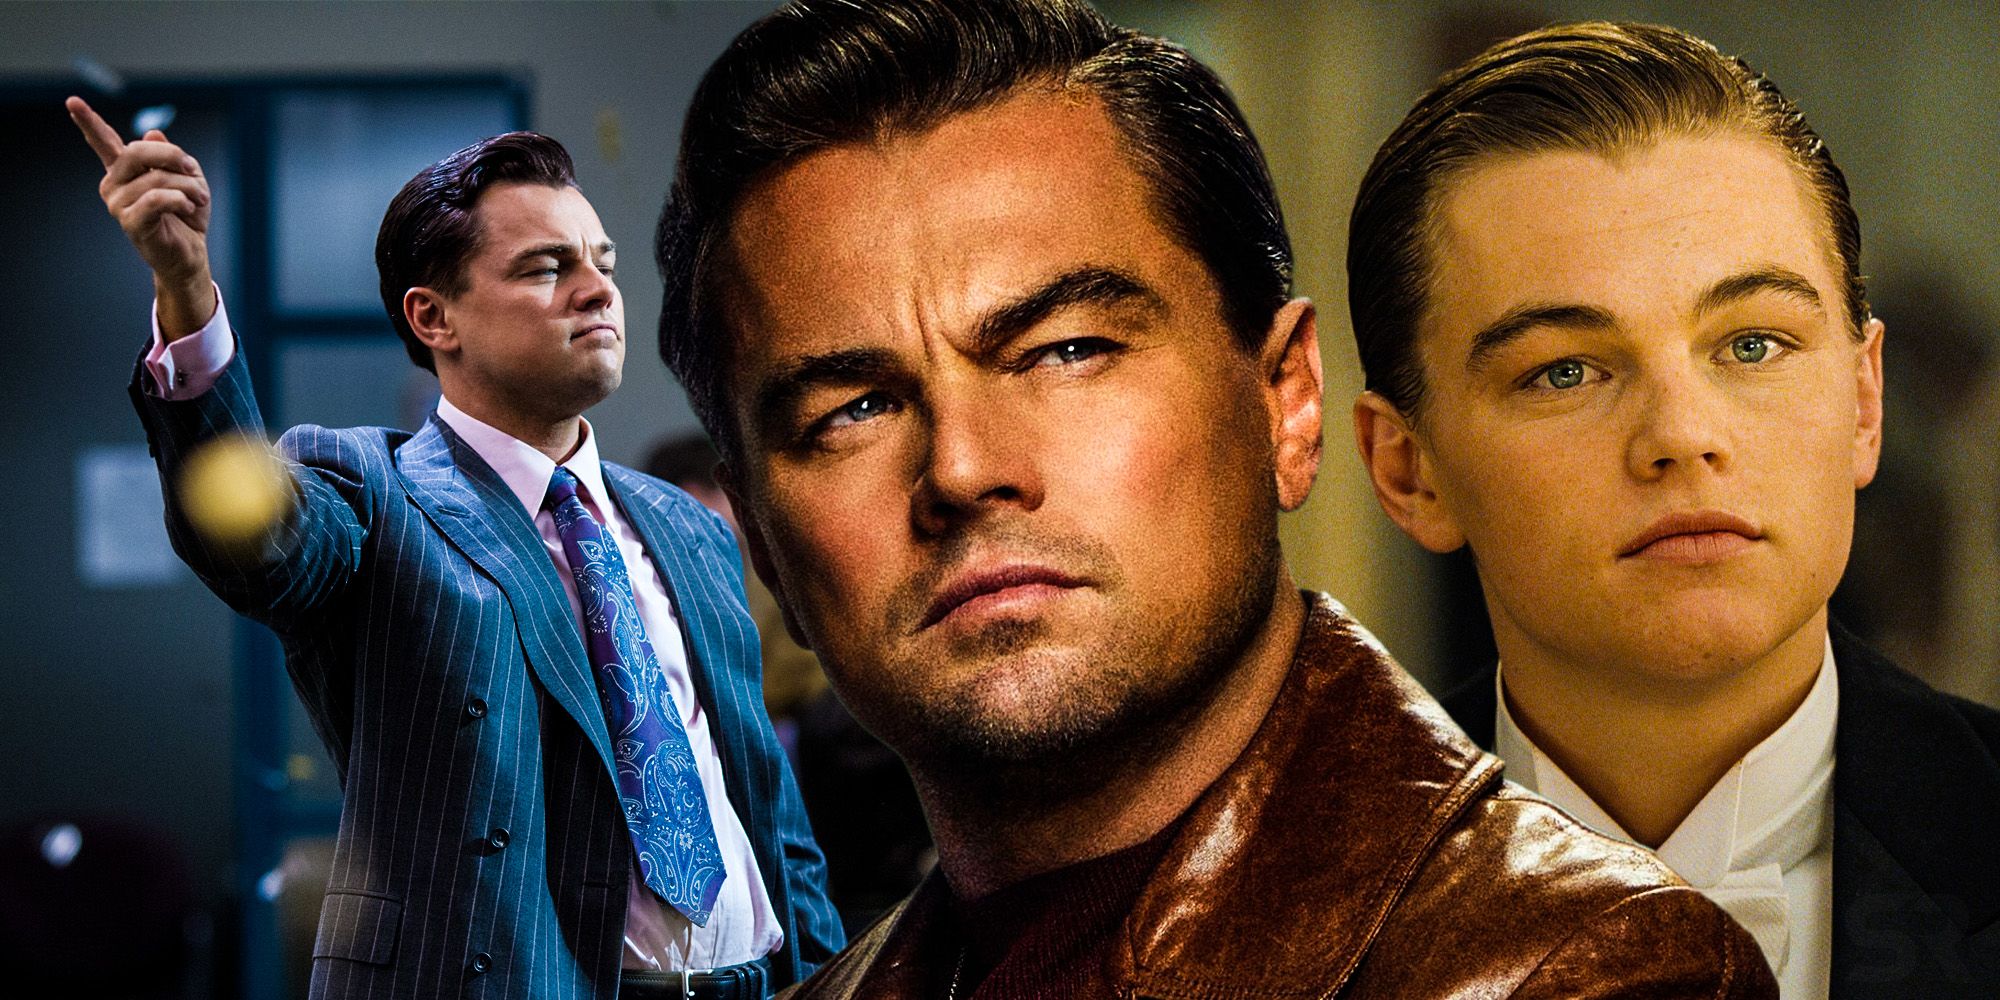 Leonardo dicaprio wolf of wall street once upon a time in hollywood titanic